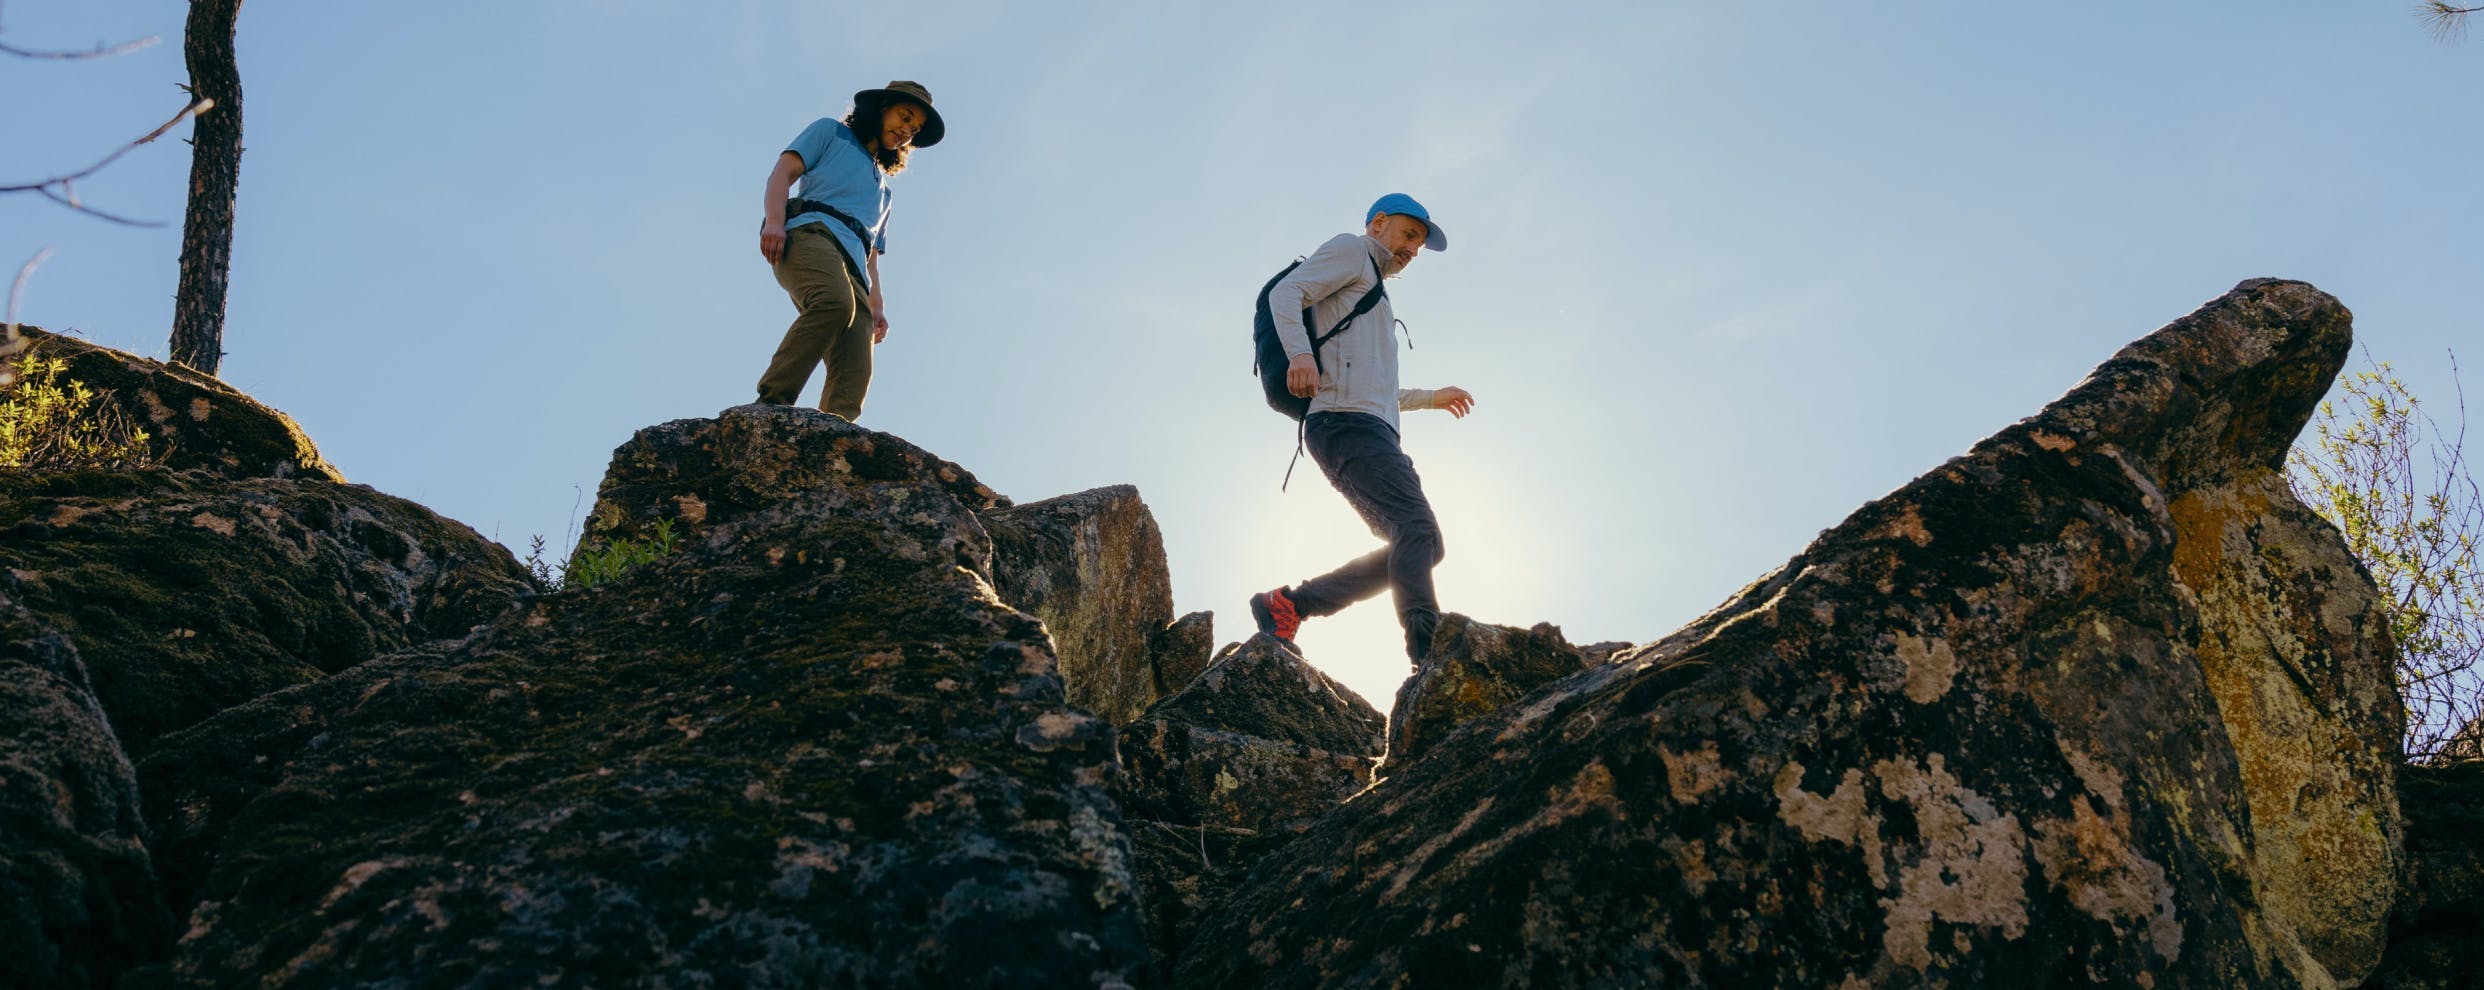 MEC hiking pants and shorts. Stretchy fabrics, durable designs and thoughtfully sourced materials made to last.